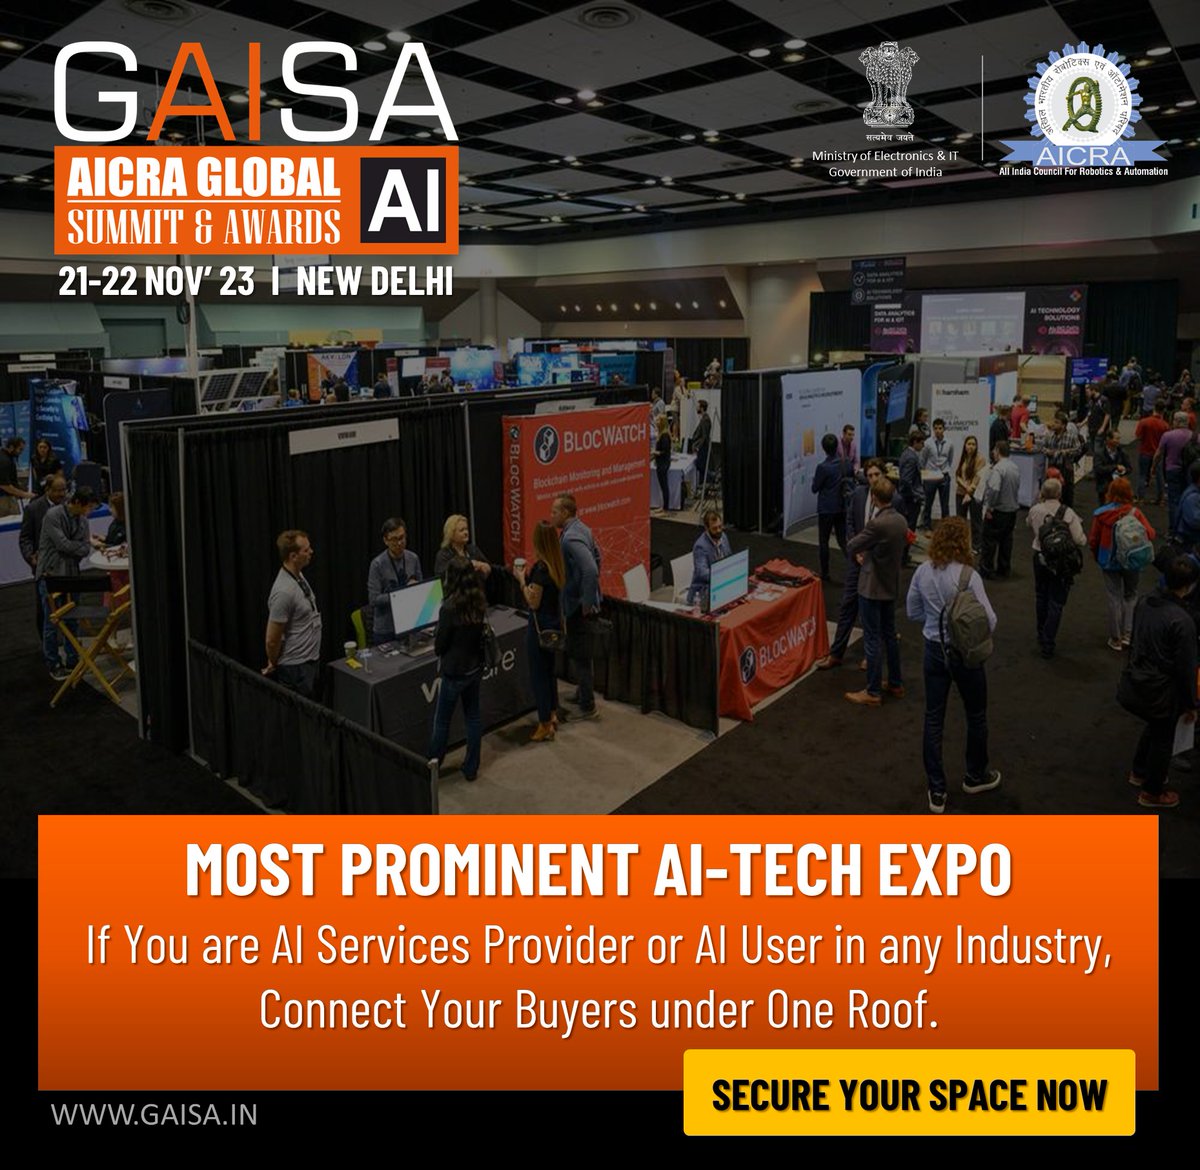 Secure your spot at the AI Technology expo! 🚀✨ Don't miss out on this opportunity to showcase your innovative solutions and connect with industry leaders. Book now and take center stage in front of a global audience! visit: gaisa.in #GAISA #ArtificialIntelligence